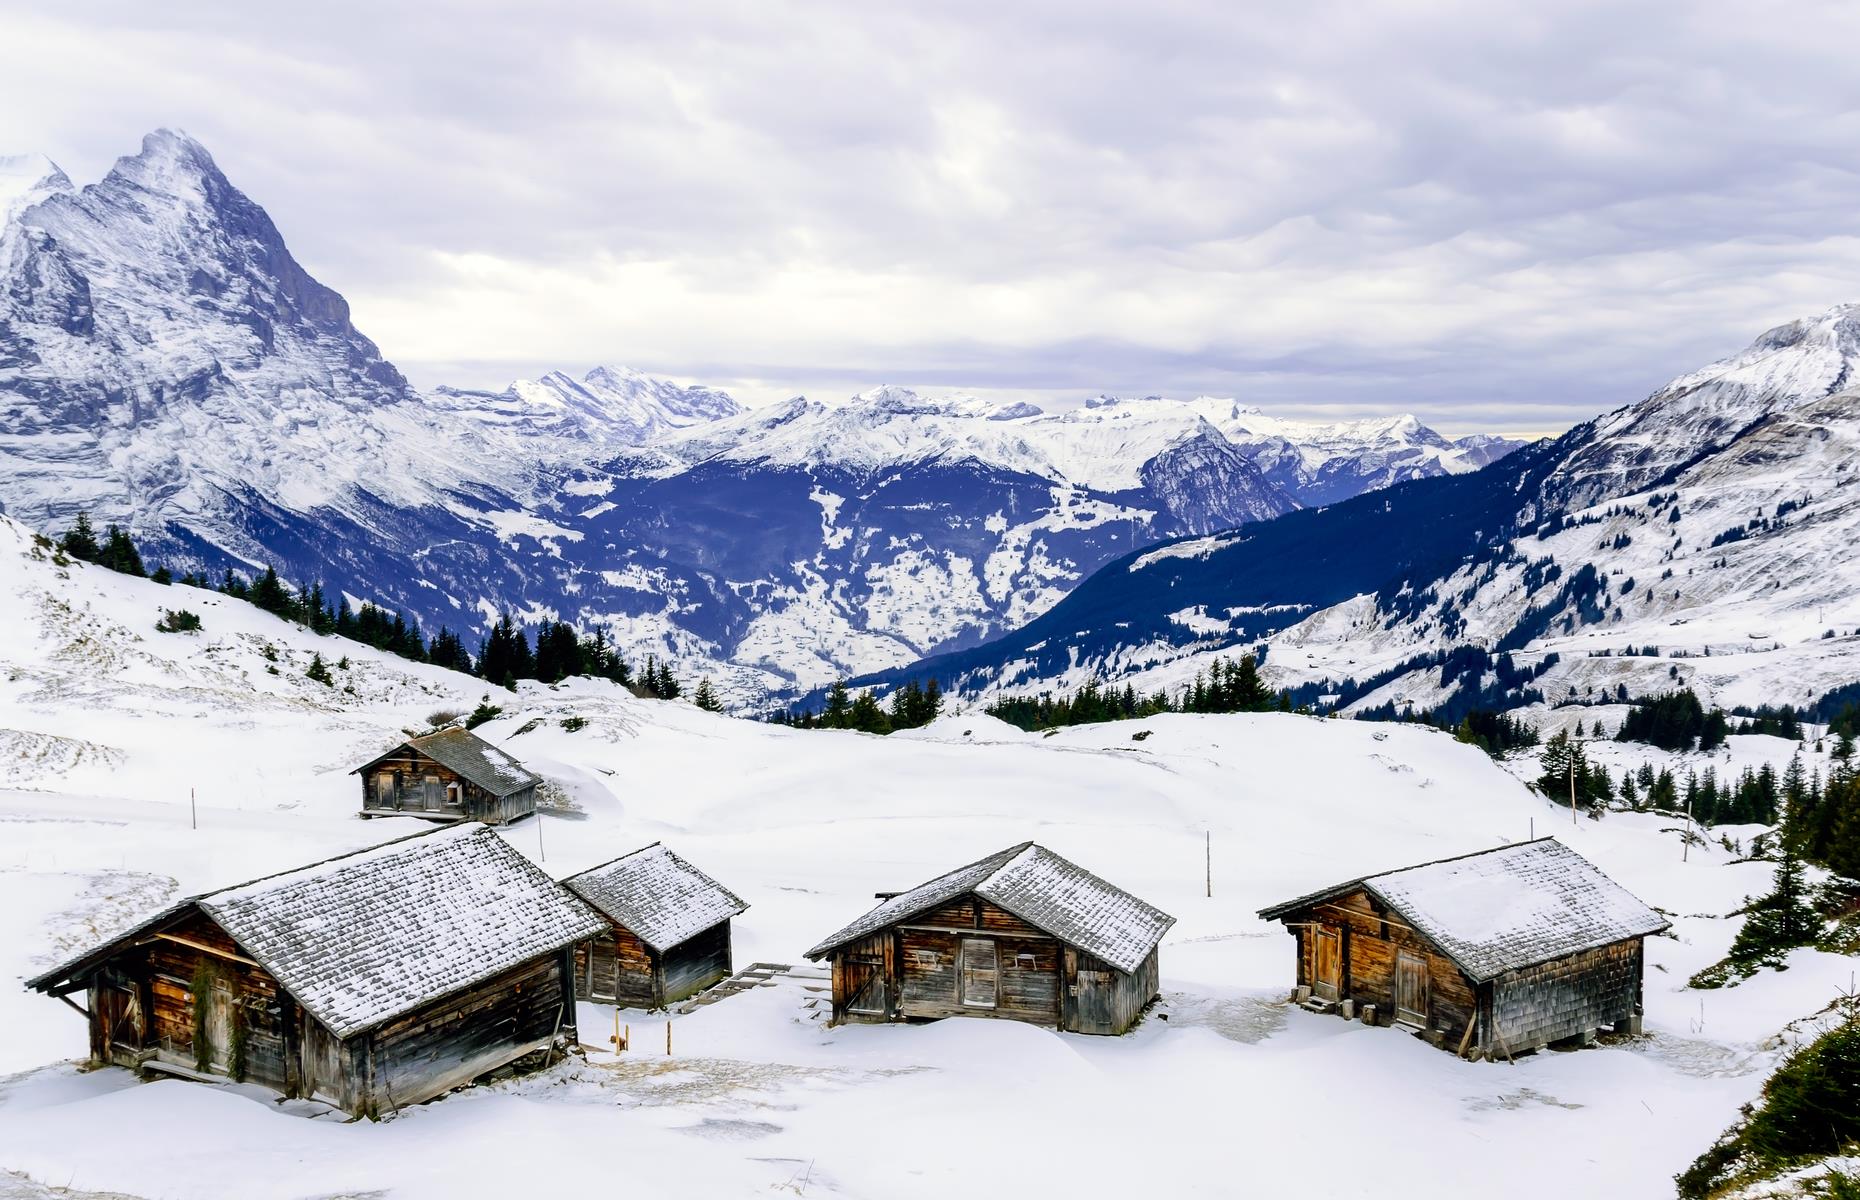 Surrounded by the regal-looking Jungfrau, Mönch and Eiger mountains, the ski village of Grindelwald oozes with alpine charm. It began life as a ski resort from the end of the 18th century and today remains a small yet thriving destination with quaint lodges, mountaintop restaurants and cozy pubs. The village is beautiful year-round: by summer, its steep slopes are plastered in verdant green; by winter, it’s shrouded in a blanket of snow.